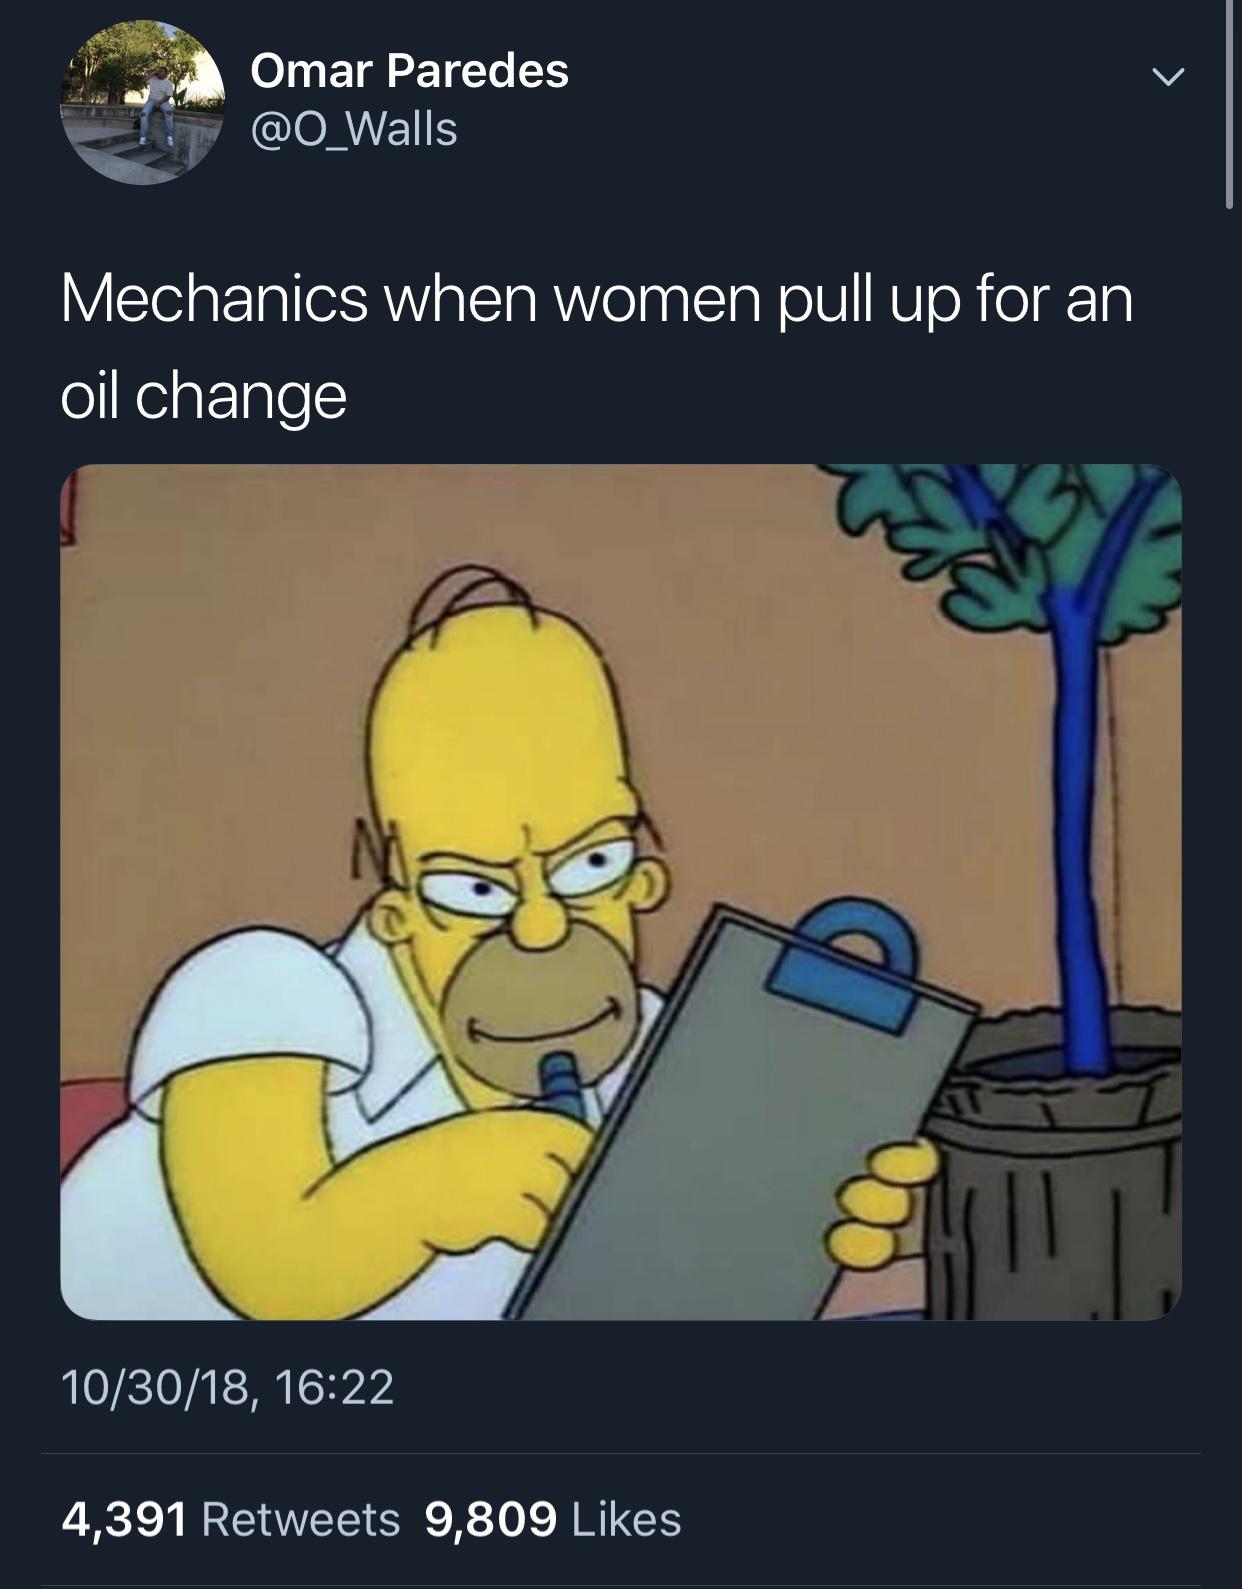 It's gonna be $600 for an oil change, mam